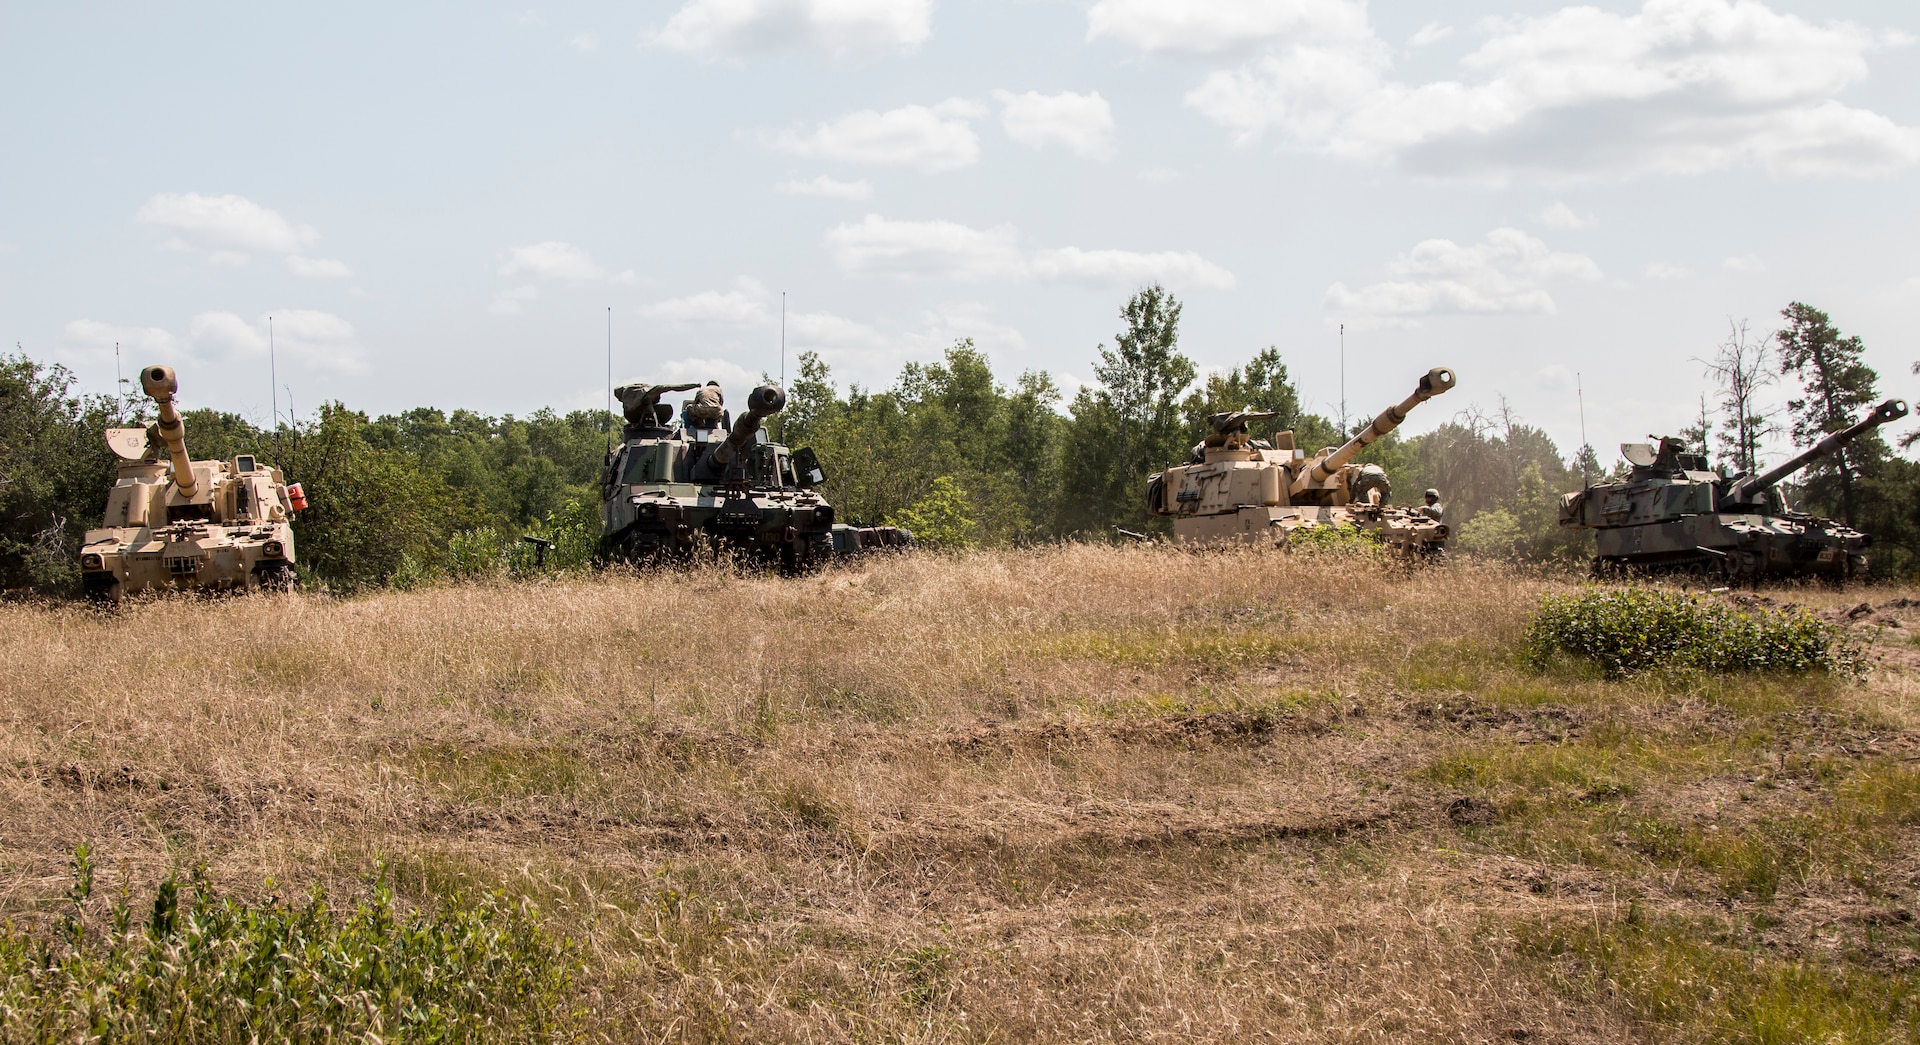 Soldiers assigned to Battery B, 1st Battalion, 201st Field Artillery, West Virginia Army National Guard, stage M109A7 Howitzers during exercise Northern Strike at Camp Grayling, Mich., on Aug. 8, 2018. The 201st FA is providing fire support operations during the joint multinational combined arms live fire exercise. (U.S. Army National Guard photo by Sgt. Tawny Schmit)